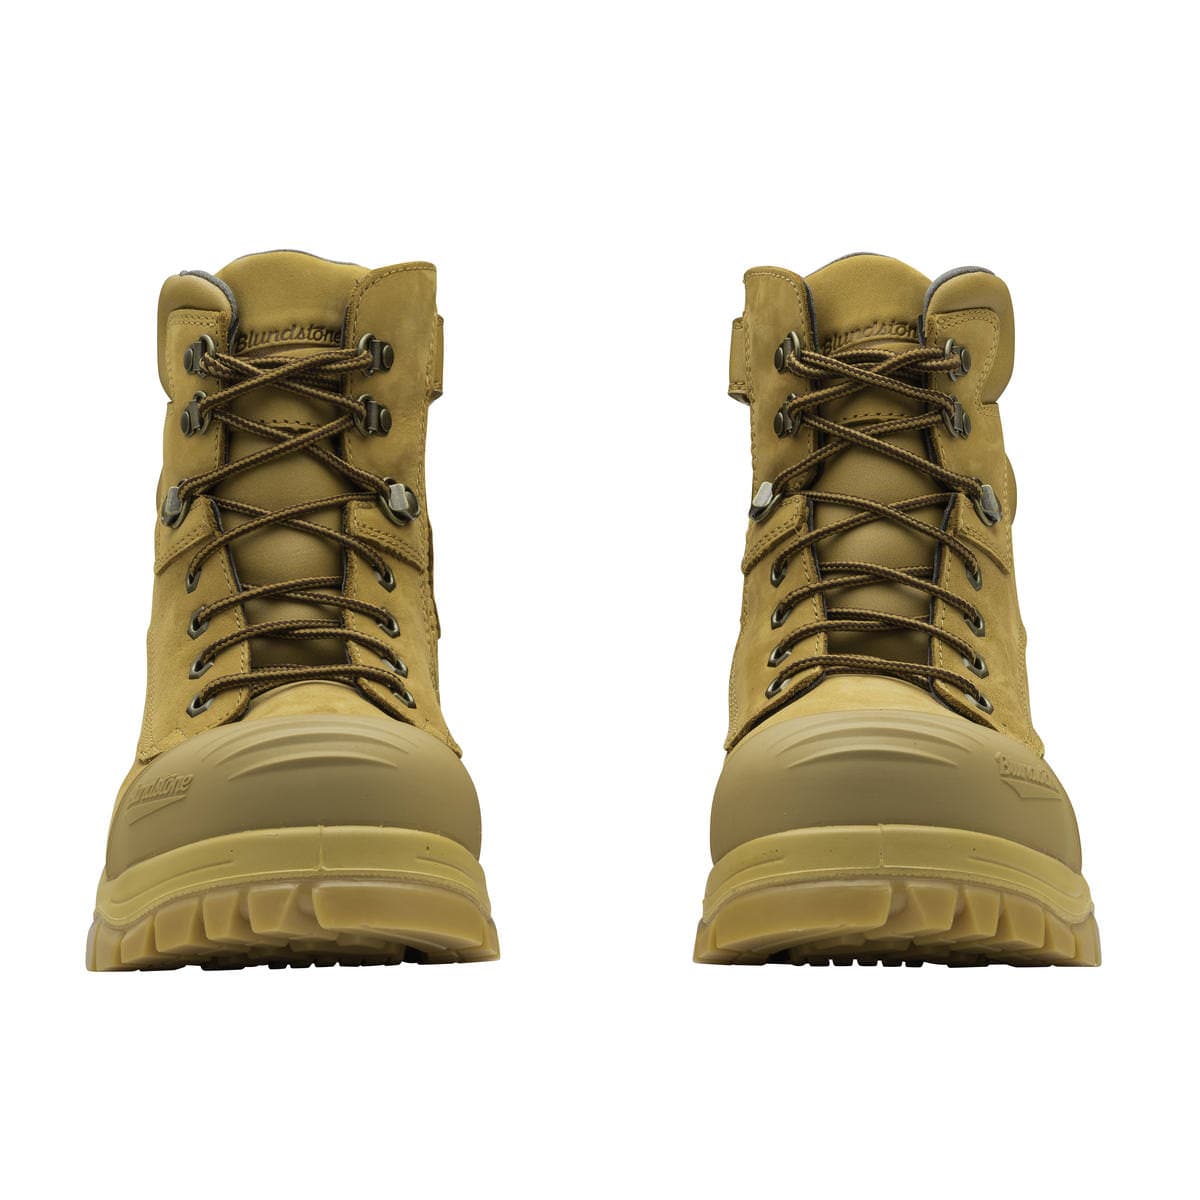 Blundstone Unisex Zip Up Series Safety Boots - Wheat #992